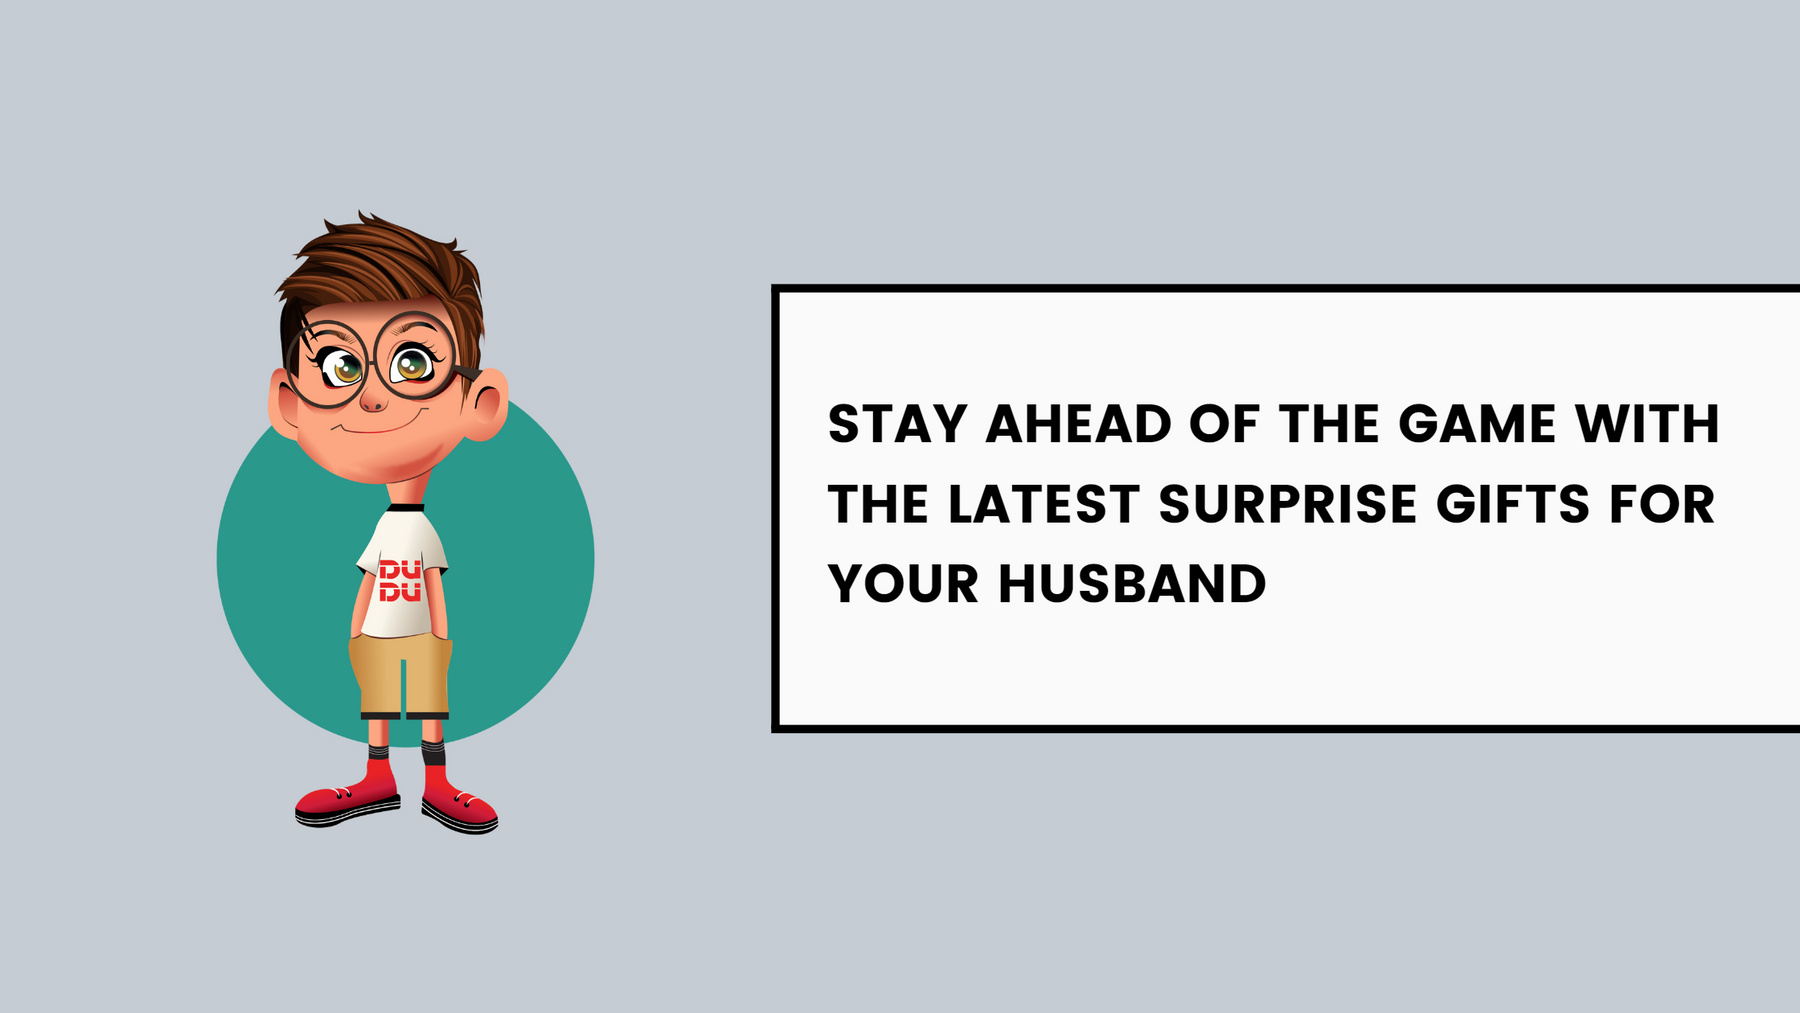 Stay Ahead Of The Game With The Latest Surprise Gifts For Your Husband